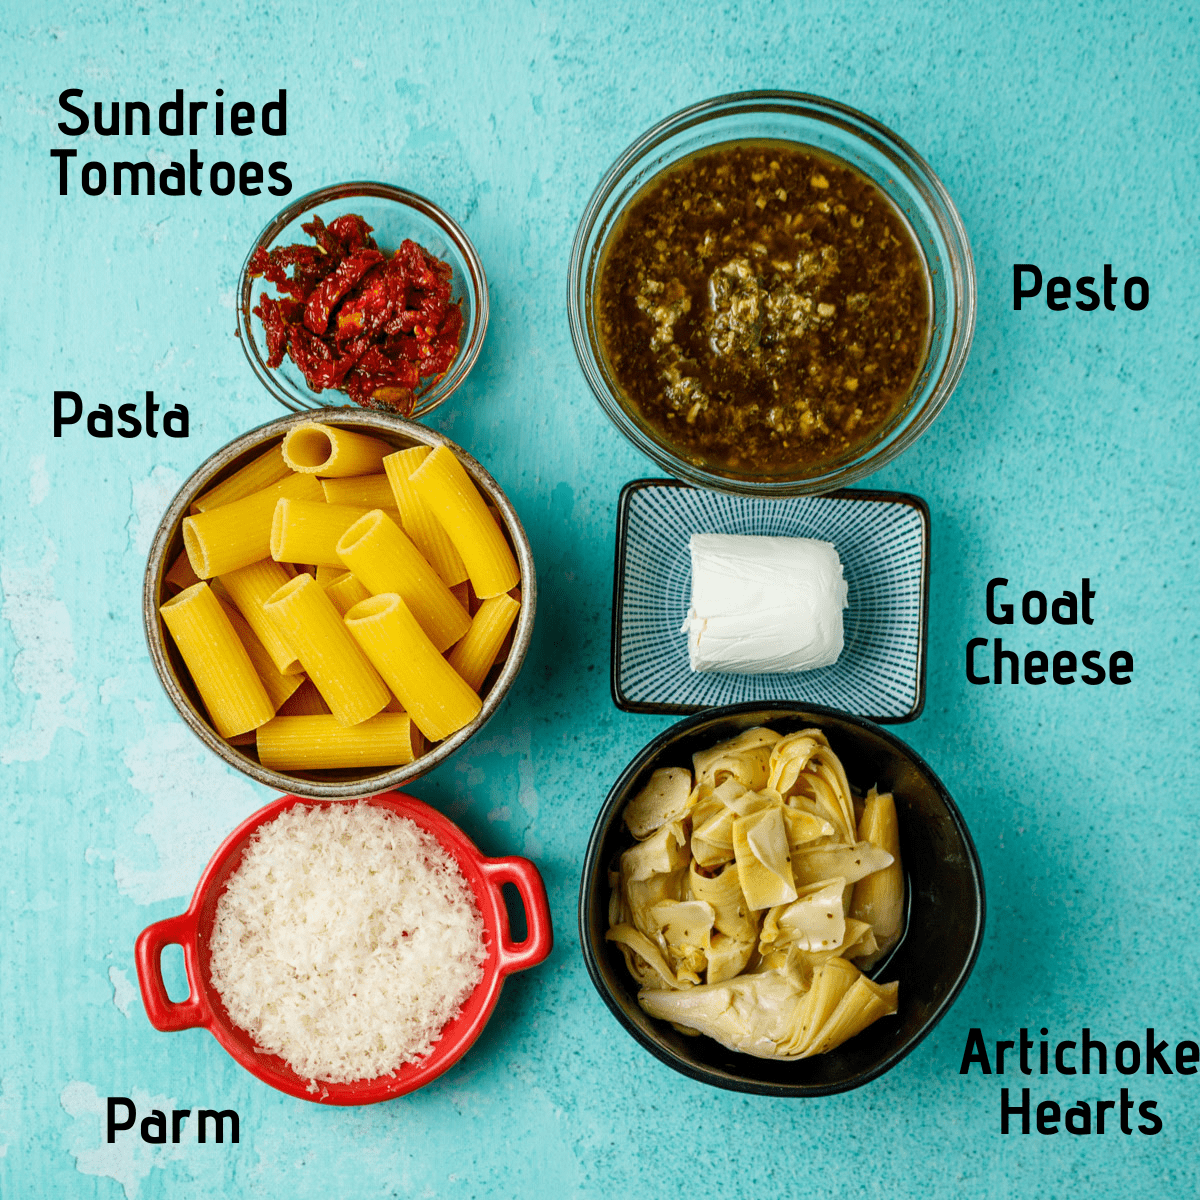 Raw ingredients laid out on a light blue background with black text labels. Sundried tomatoes, pesto, goat cheese, artichoke, parm and pasta.